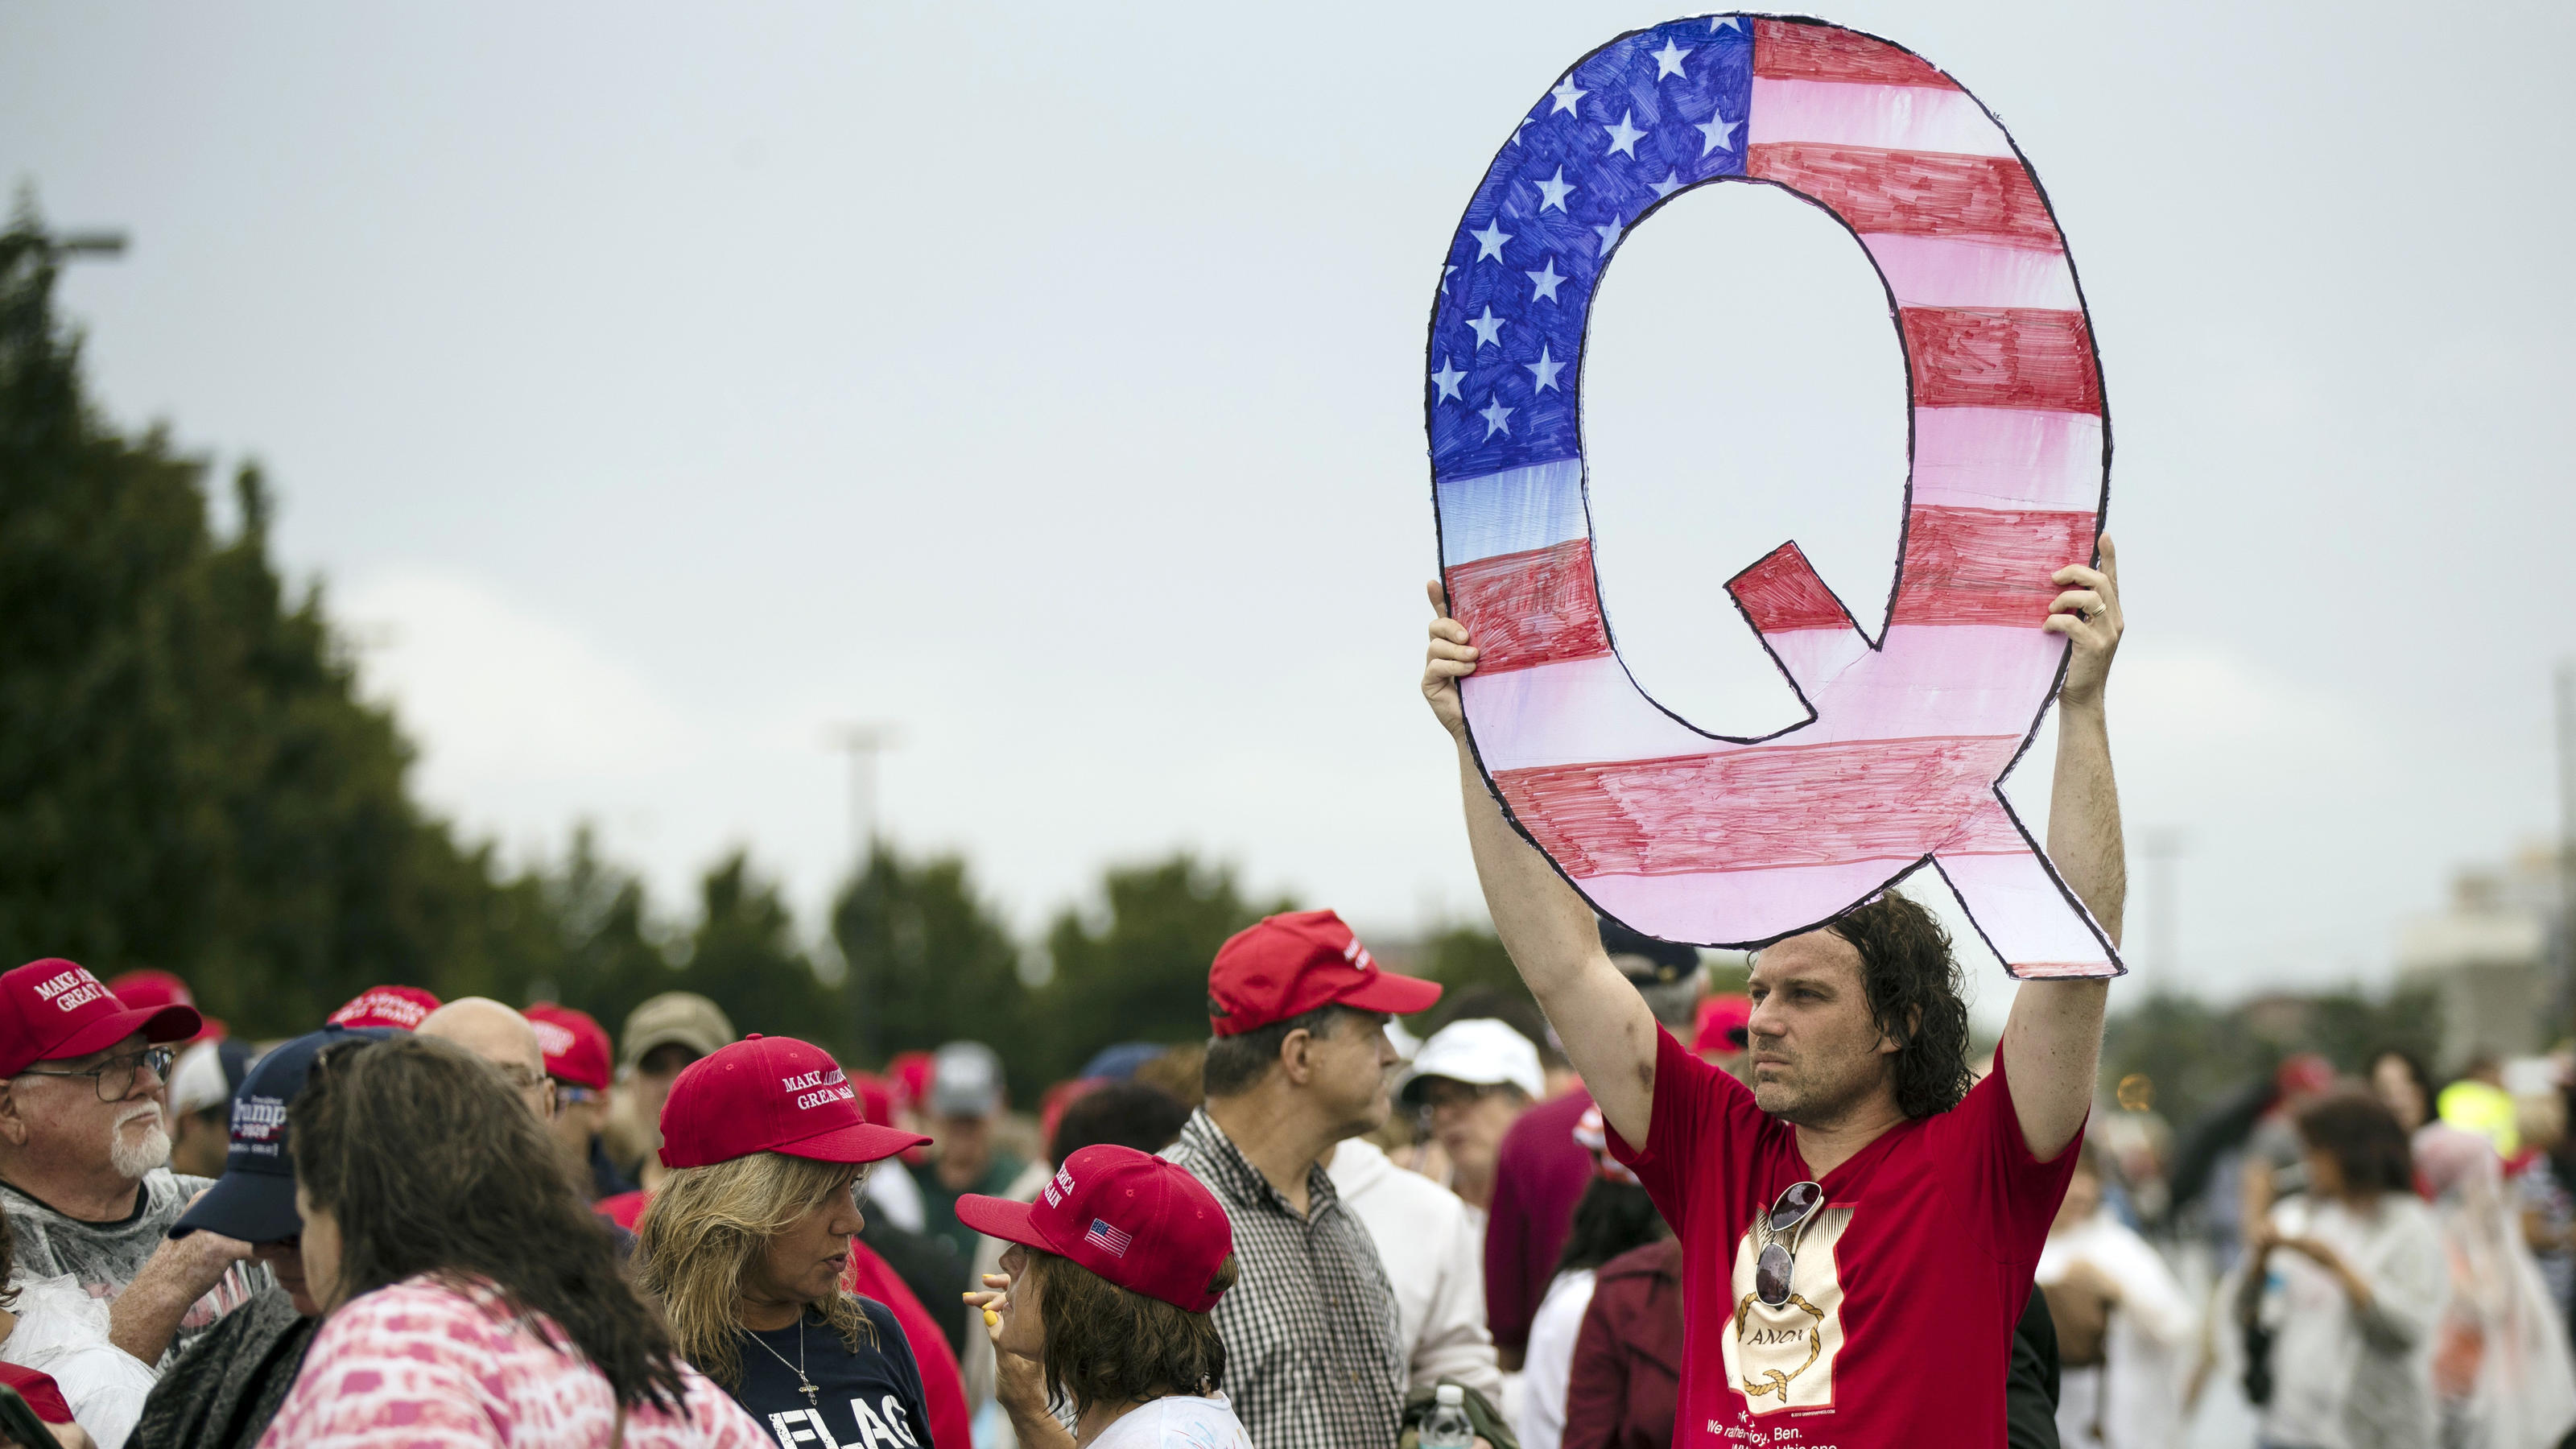 David Reinert holding a Q sign waits in line with others to enter a campaign rally with President Donald Trump and U.S. Senate candidate Rep. Lou Barletta, R-Pa., Thursday, Aug. 2, 2018, in Wilkes-Barre, Pa. (AP Photo/Matt Rourke)